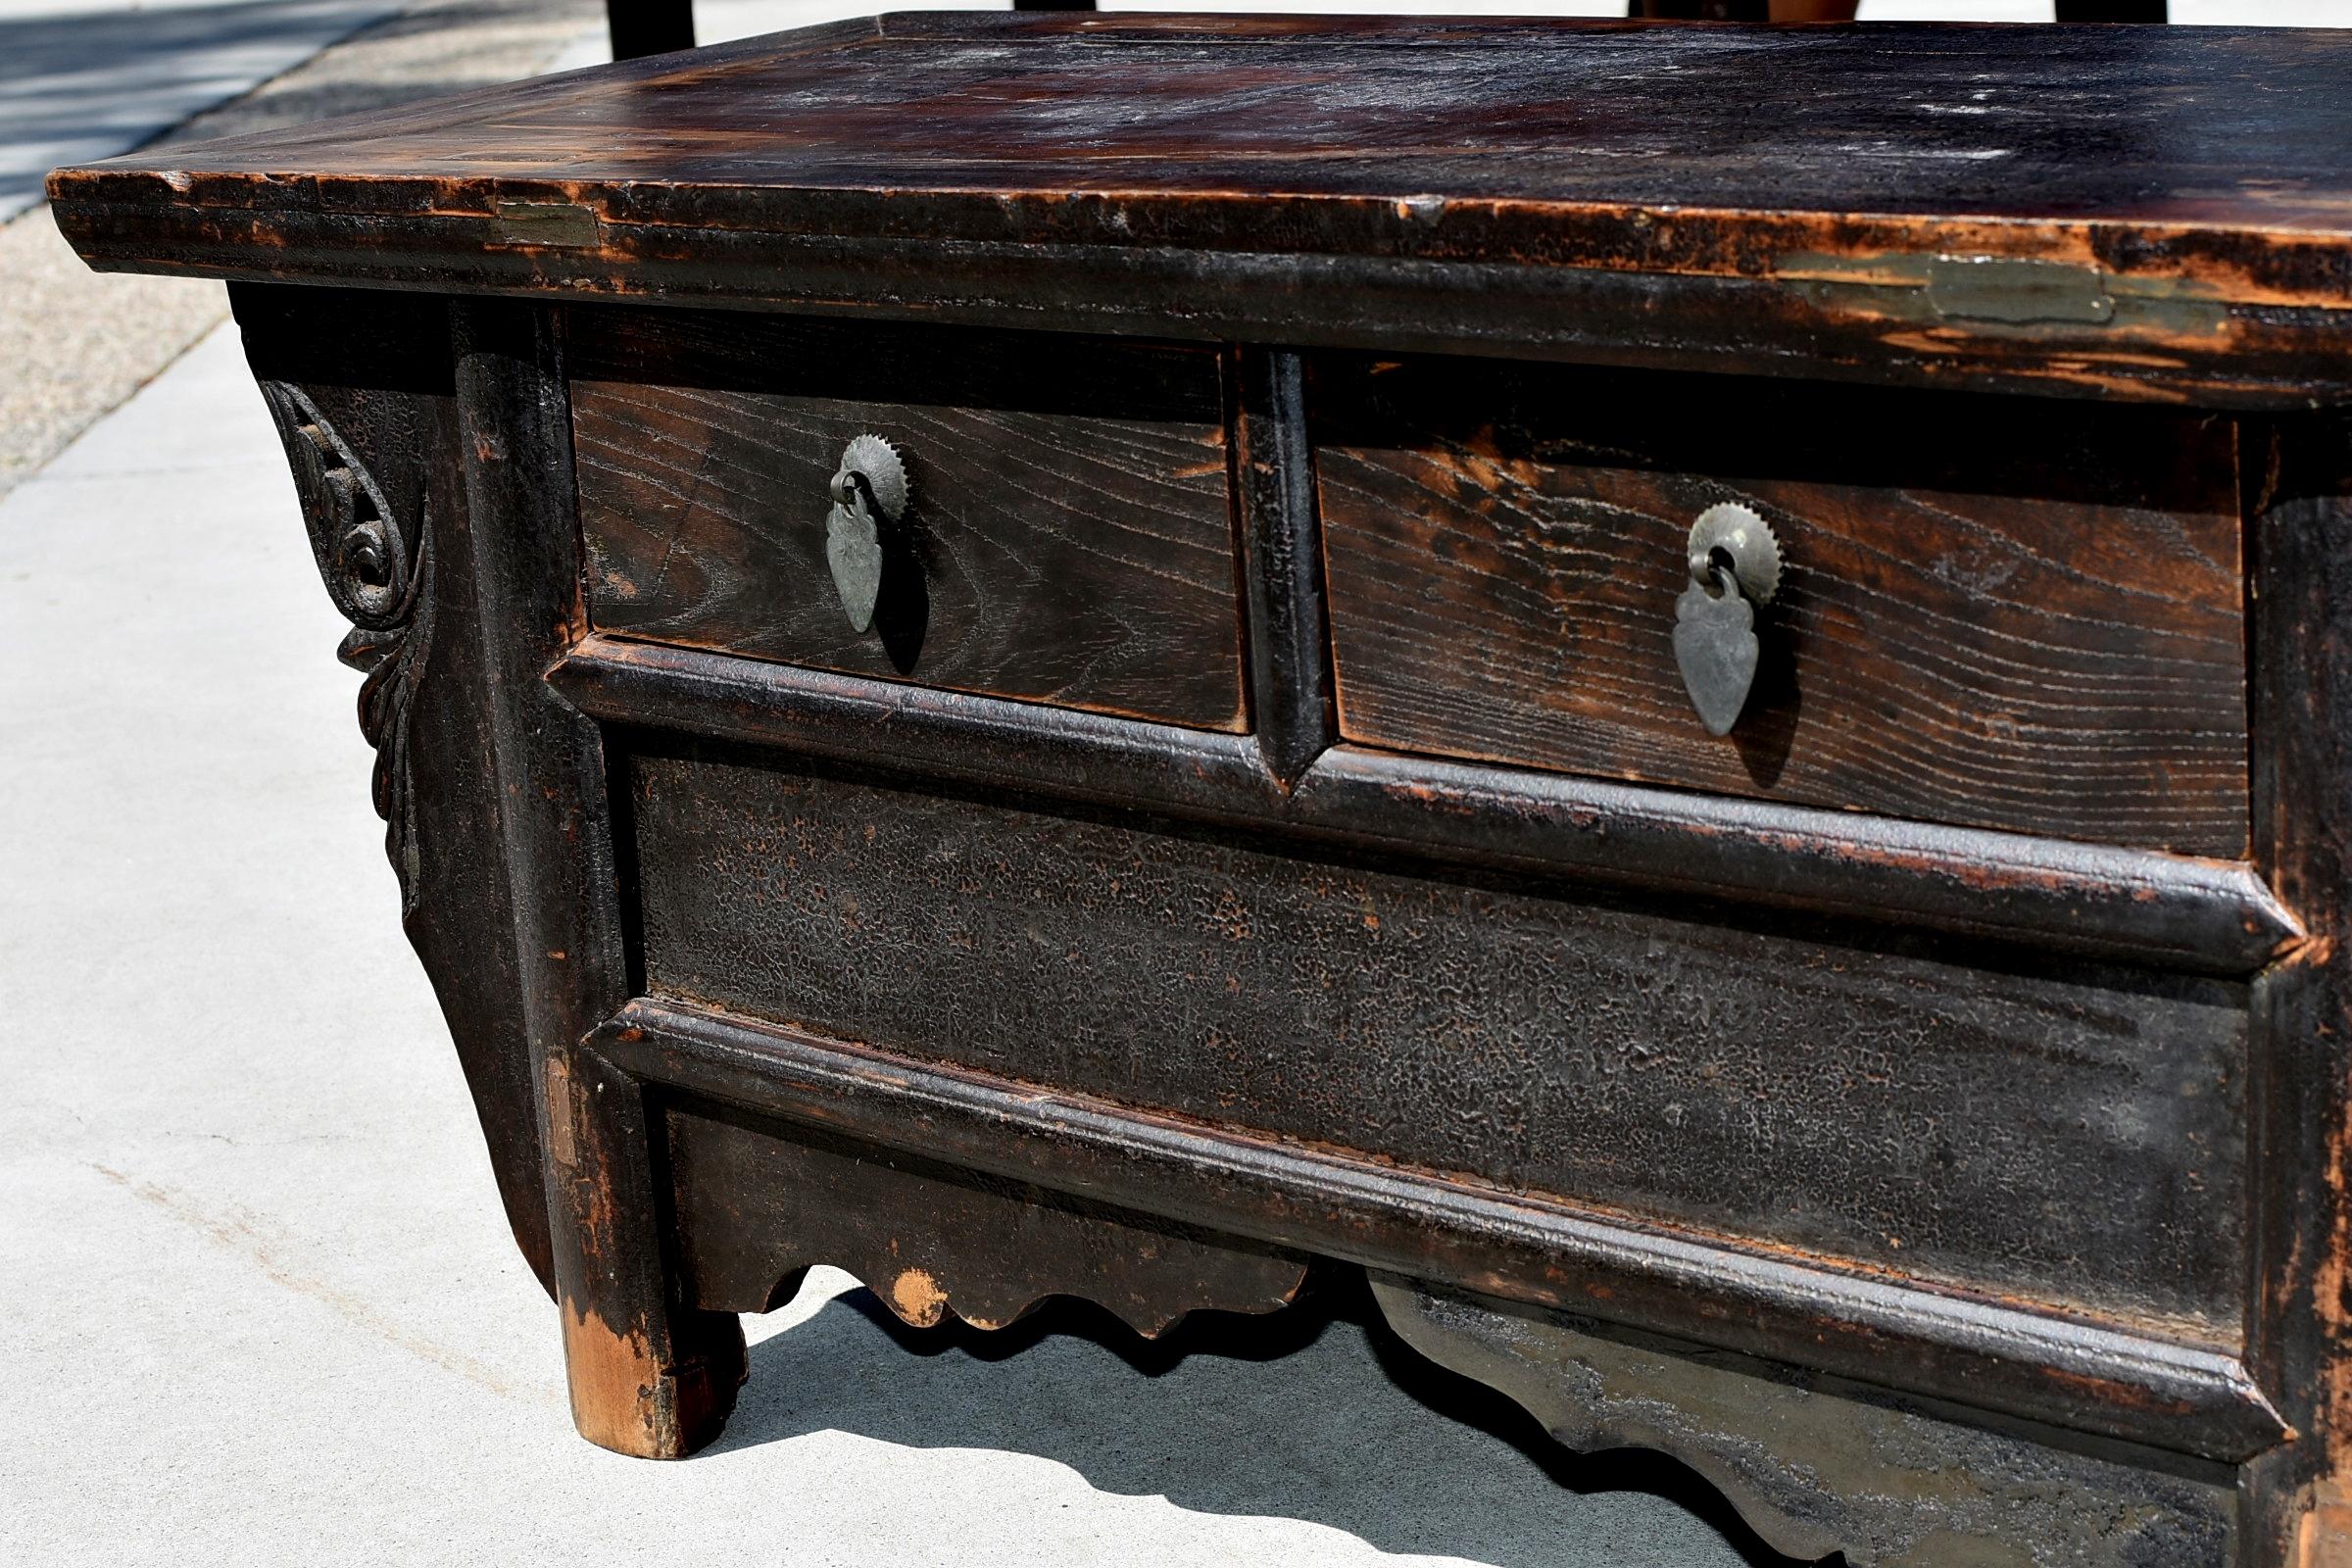 19th Century Low Meditation Table Chest with Secret Compartment, Chinese Antique